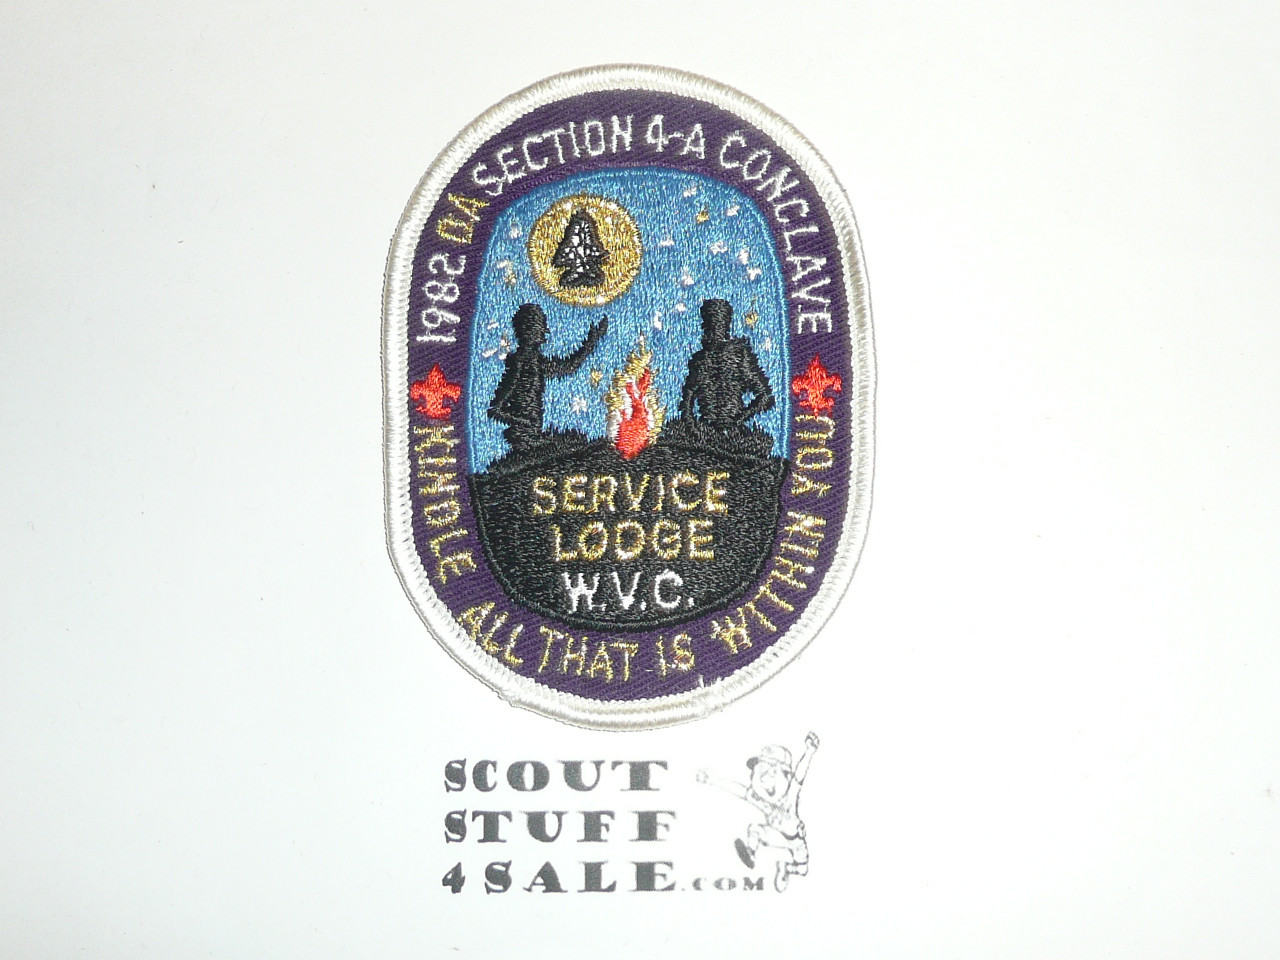 Section EC 4A 1982 O.A. Conference Patch - Scout